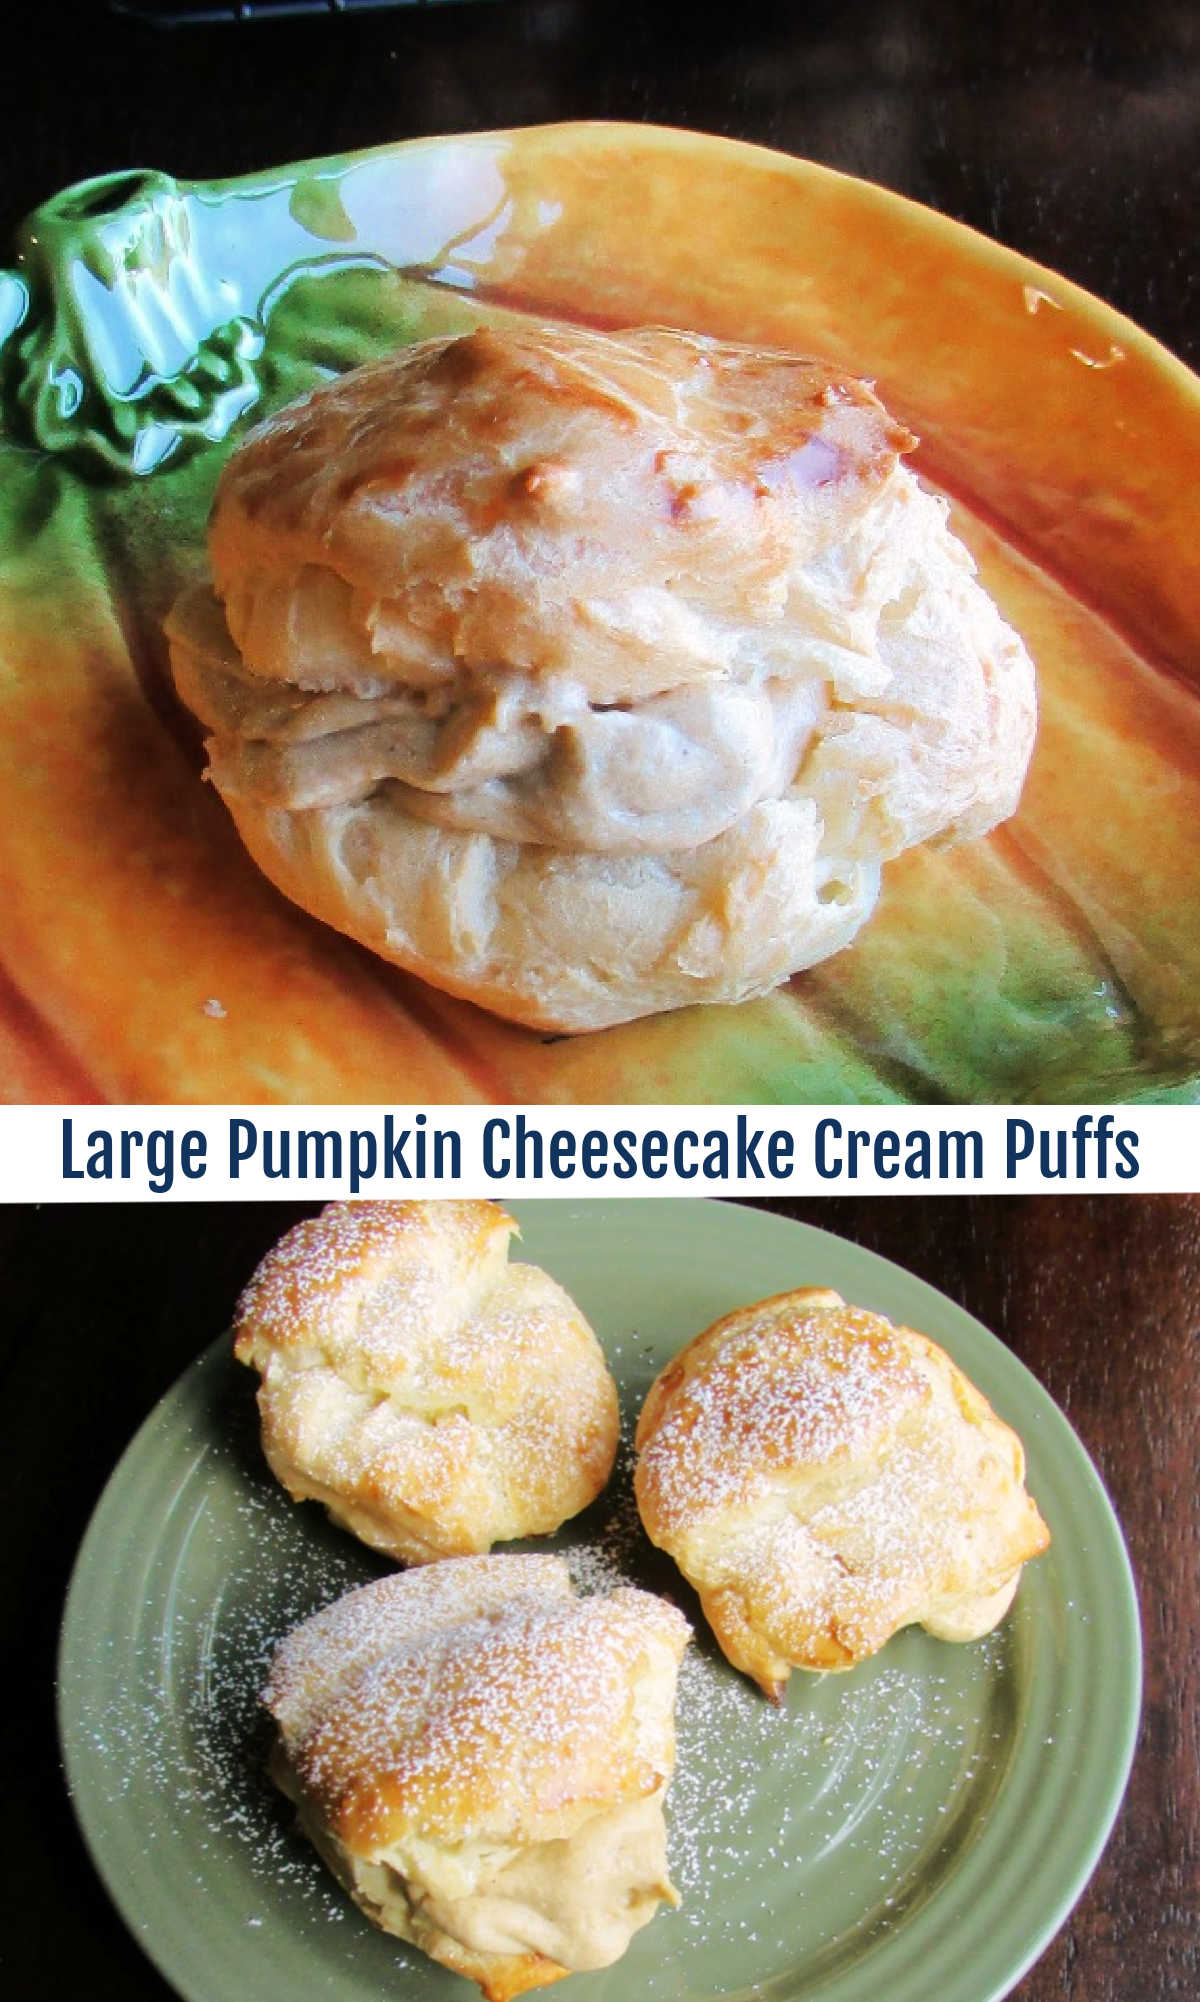 Cream puffs are easier to make than you might think. These slightly oversized pastry shells are filled with a pumpkin cheesecake cream for a perfect dessert!